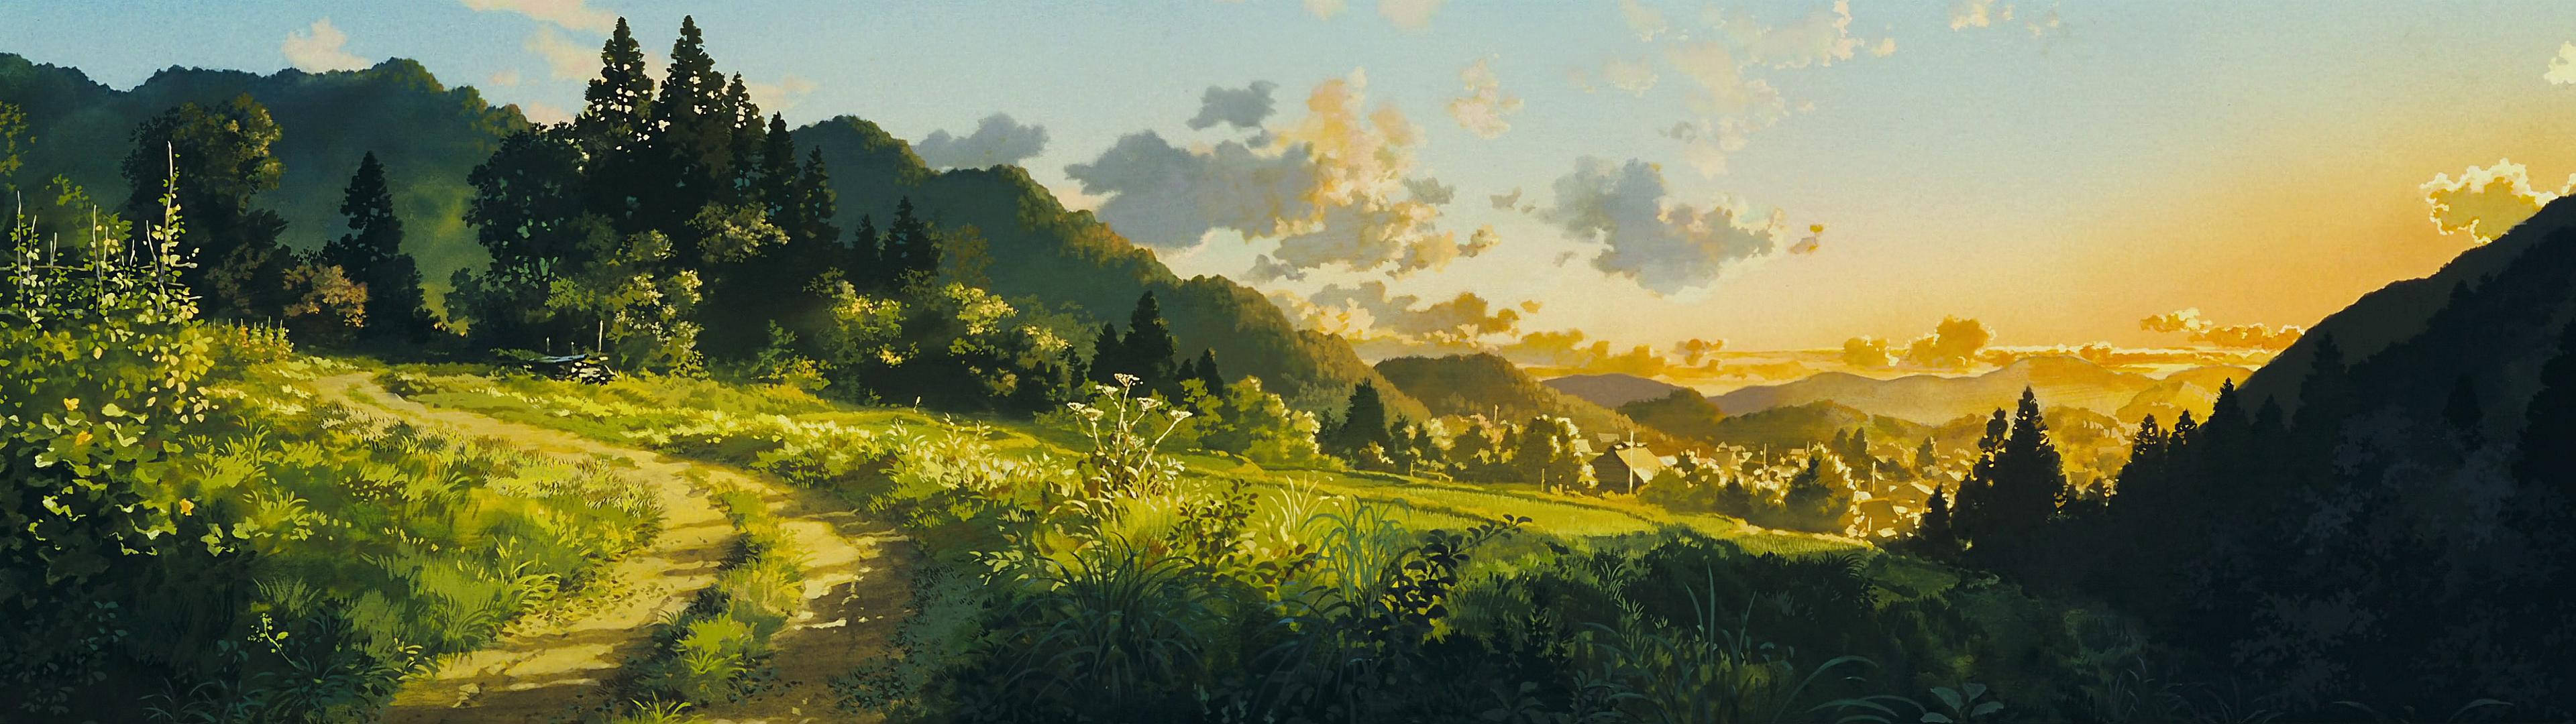 Anime Inspired Green Landscape, Perfect For Dual Monitor Wallpaper